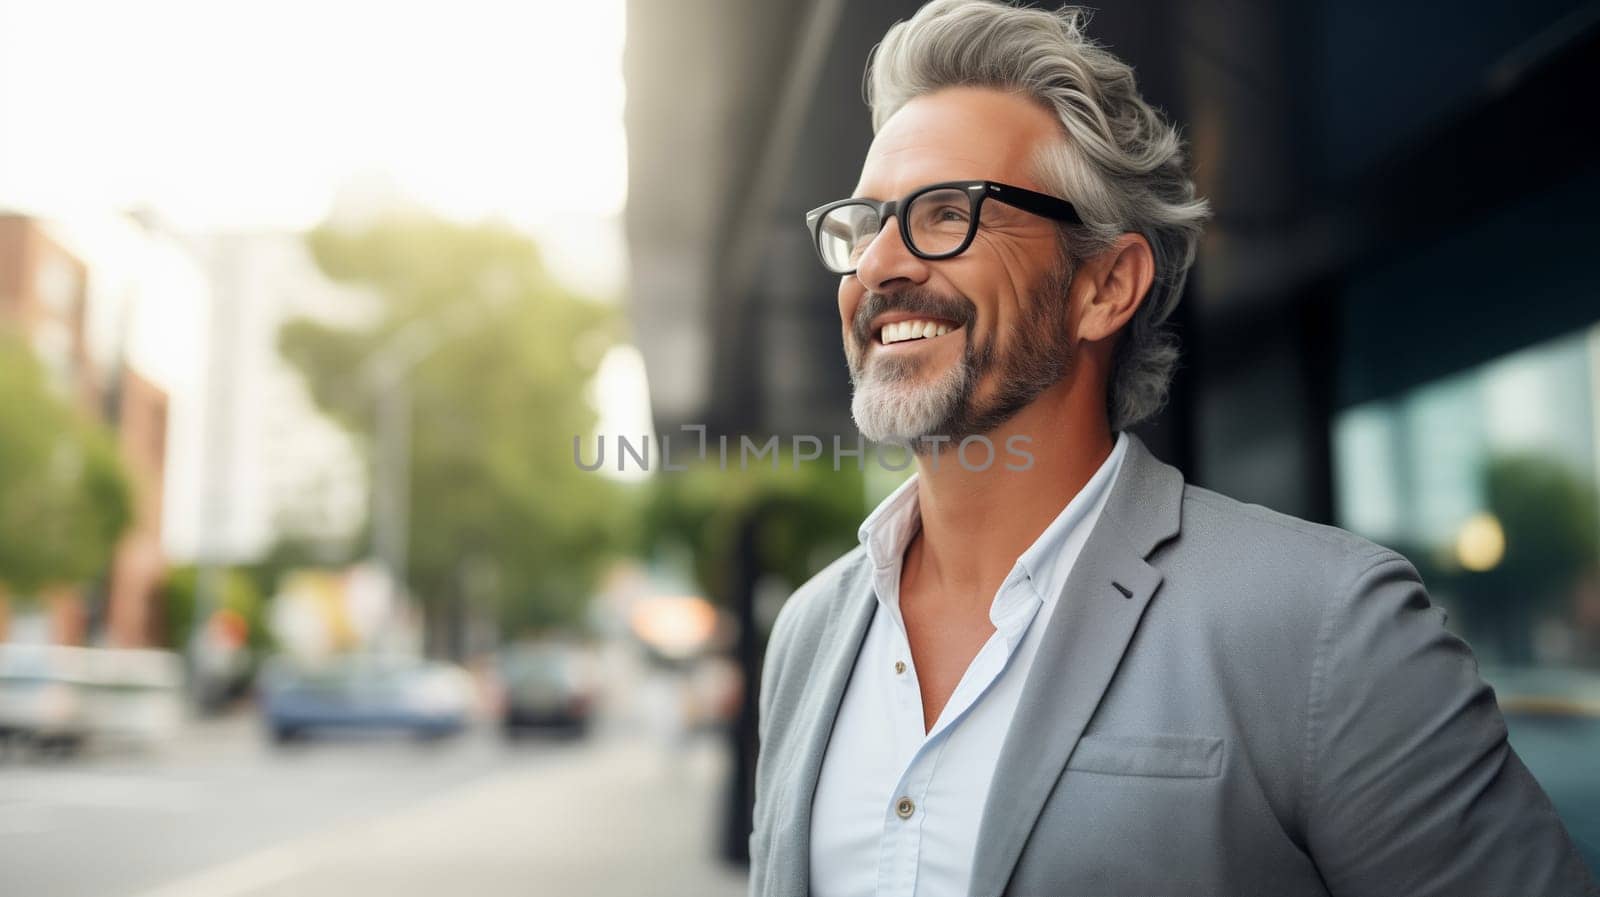 Inspired confident happy smiling mature businessman in glasses standing in the city, wearing gray business suit, looking away